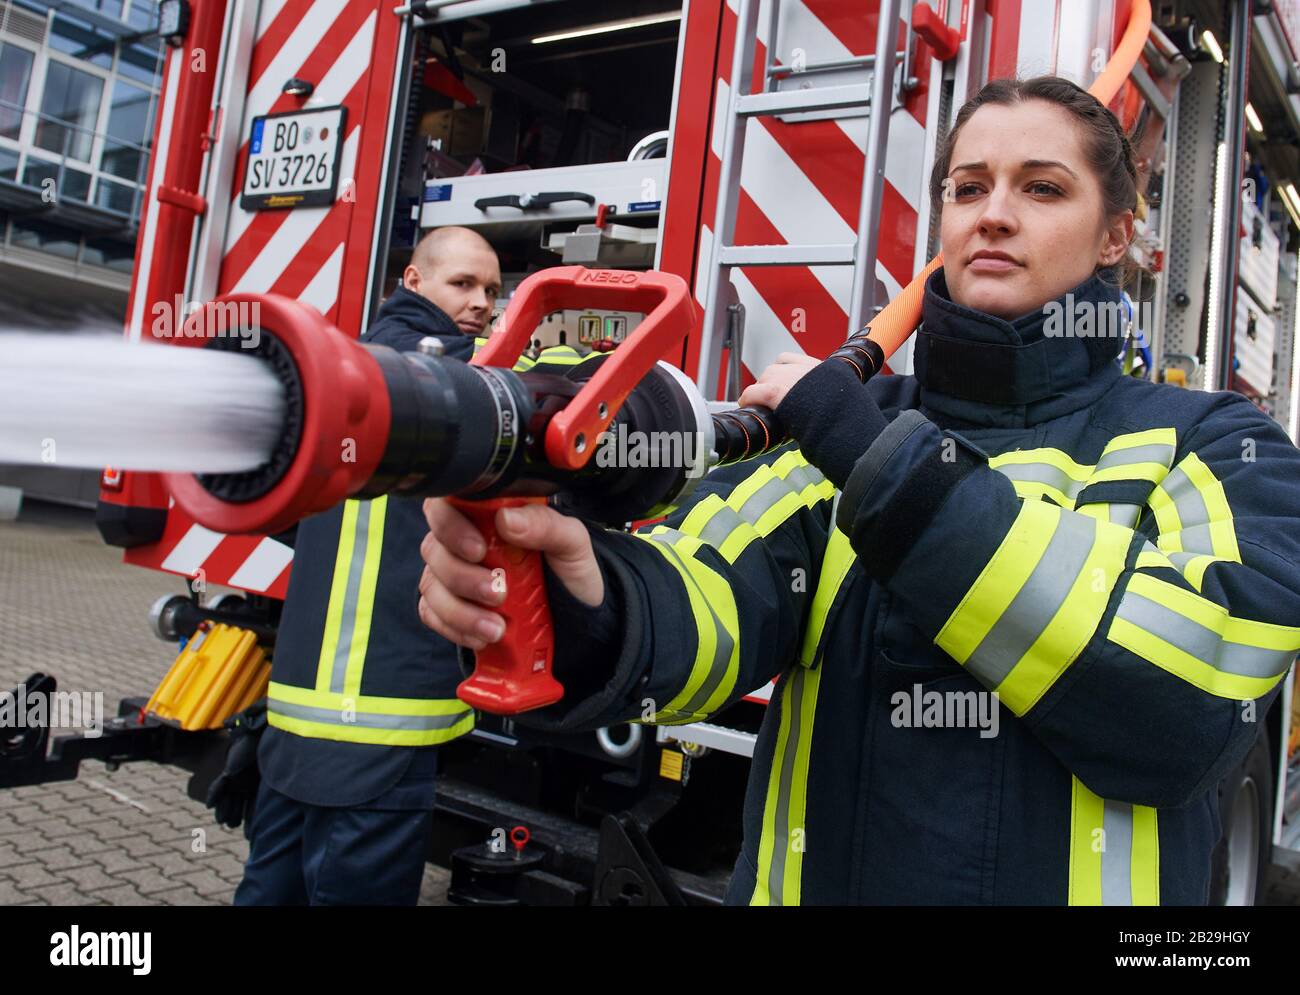 Bochum, Germany. 19th Feb, 2020. Firefighter Jasmin (29) stands next to a colleague in front of a fire engine and operates the water pump. Women are the exception in the professional fire brigade in Germany. According to the latest figures from the end of 2017, women account for only 1.41 percent of all members of the professional fire brigade. The 29-year-old is part of a team that will be the focus of the new WDR docutainment season 'Feuer & Flamme' starting on 23 March. Credit: Bernd Thissen/dpa/Alamy Live News Stock Photo